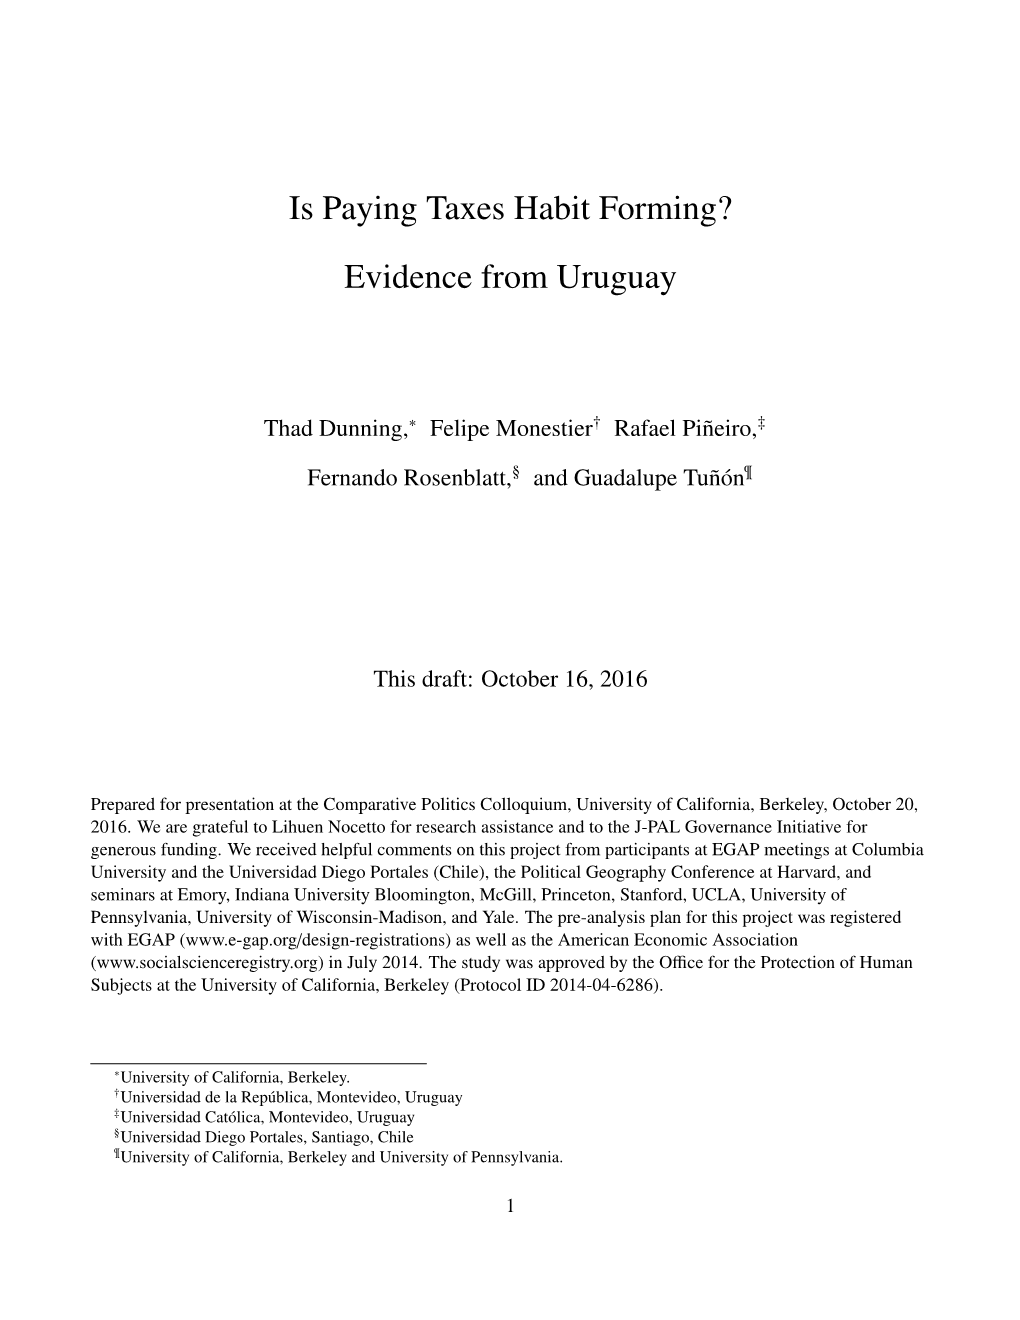 Is Paying Taxes Habit Forming? Evidence from Uruguay